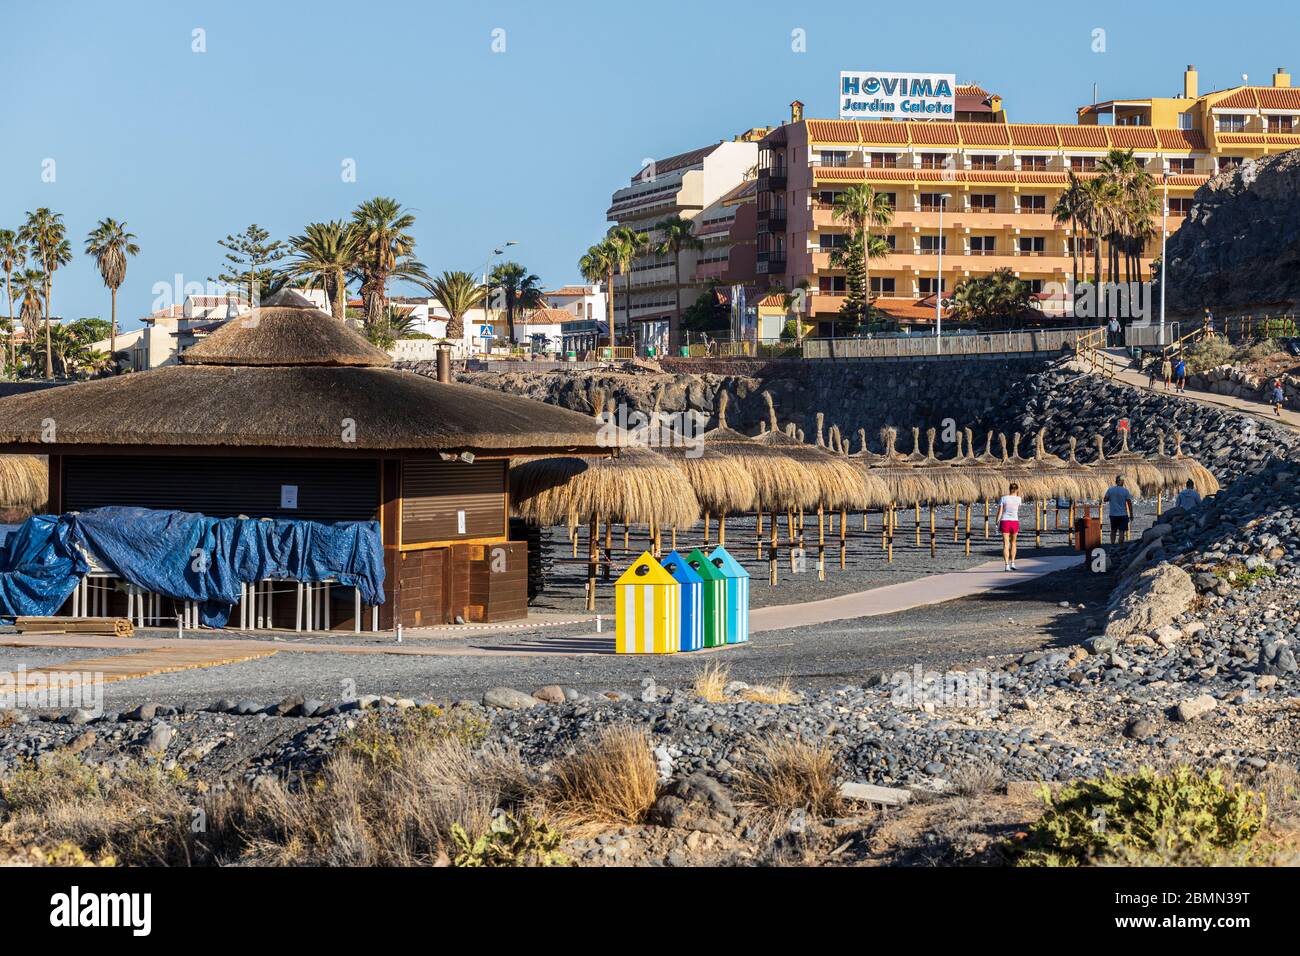 Early morning excercise on the Playa Enramada in the first phase of de-escalation during the covid 19 lockdown in the tourist resort area of Costa Ade Stock Photo